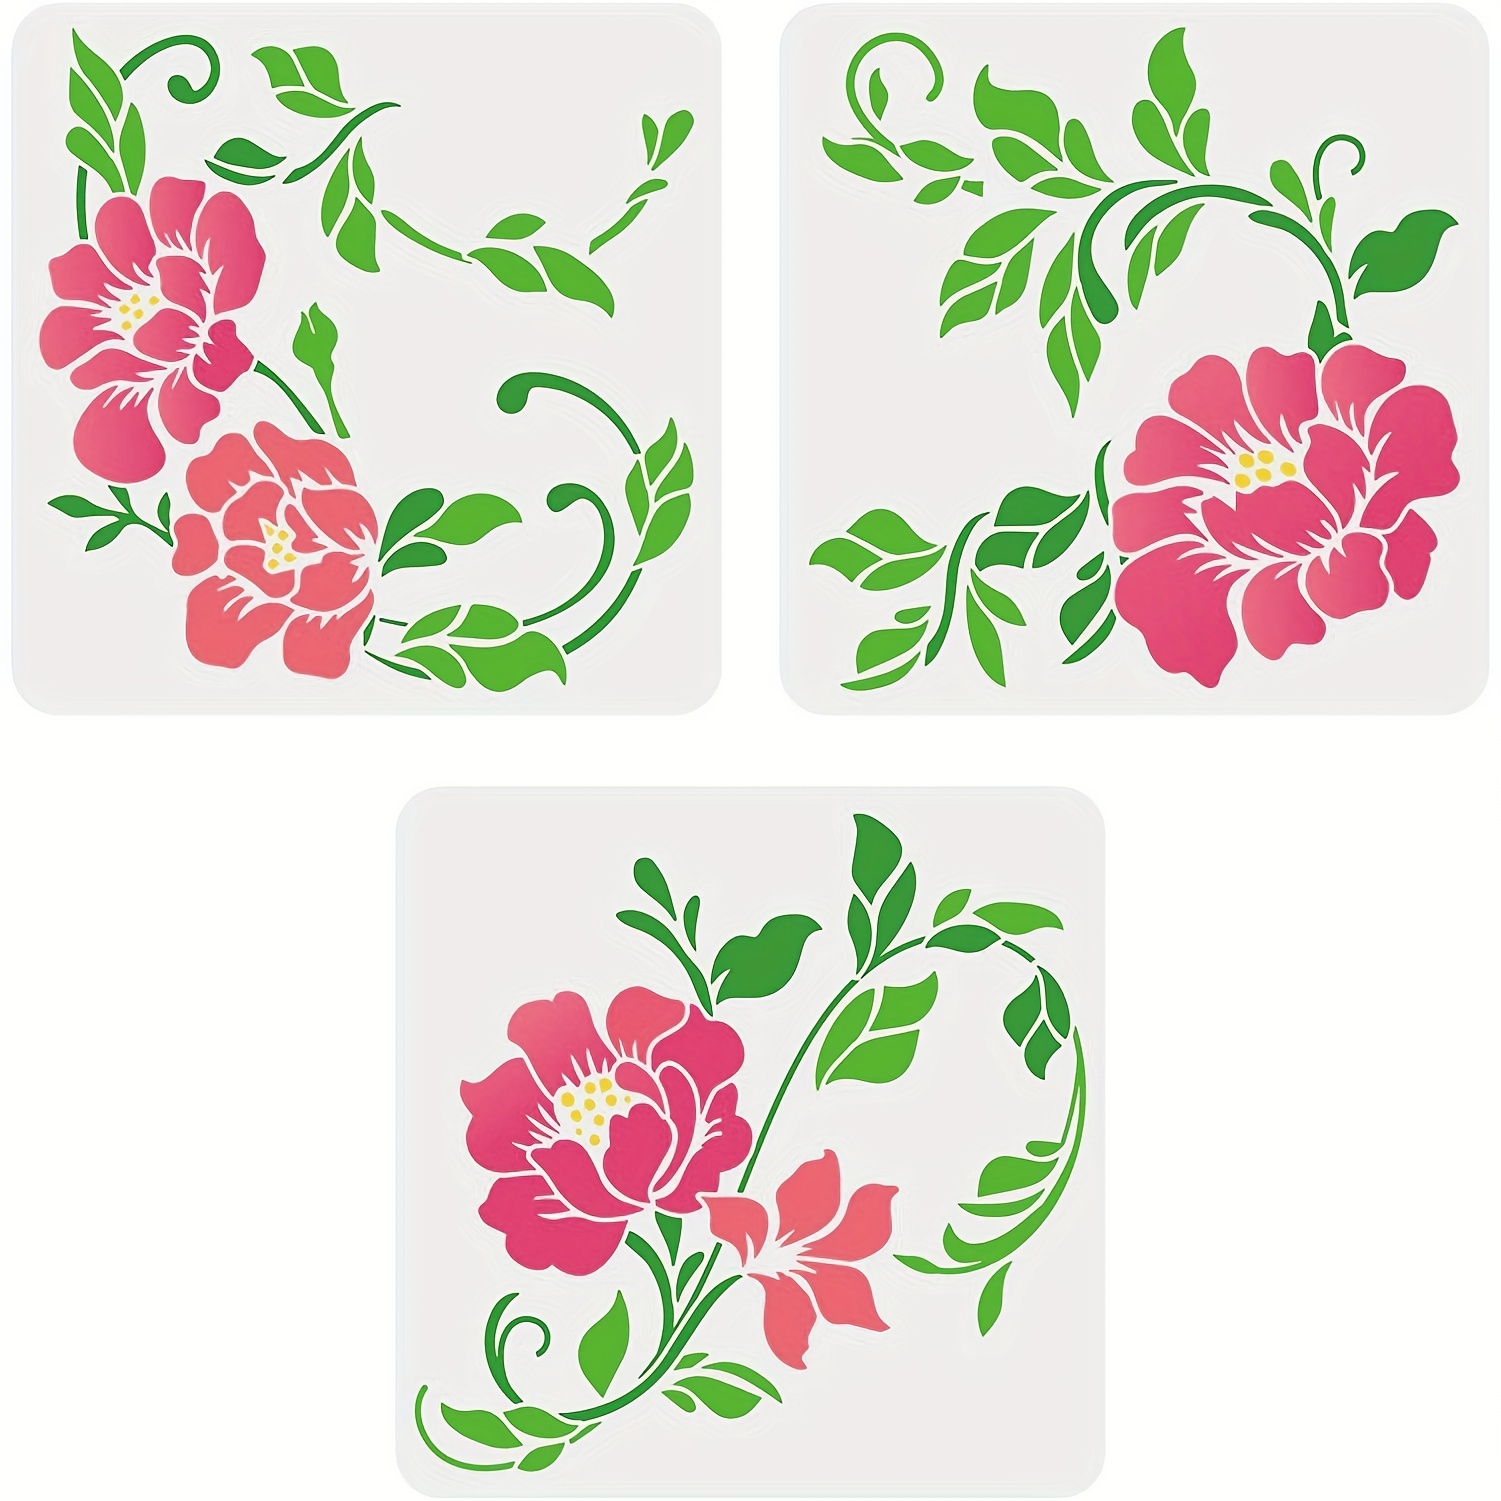 MAGIDOVE 30PCS Flower Stencils for Painting on Wood 3x3 Inch Small